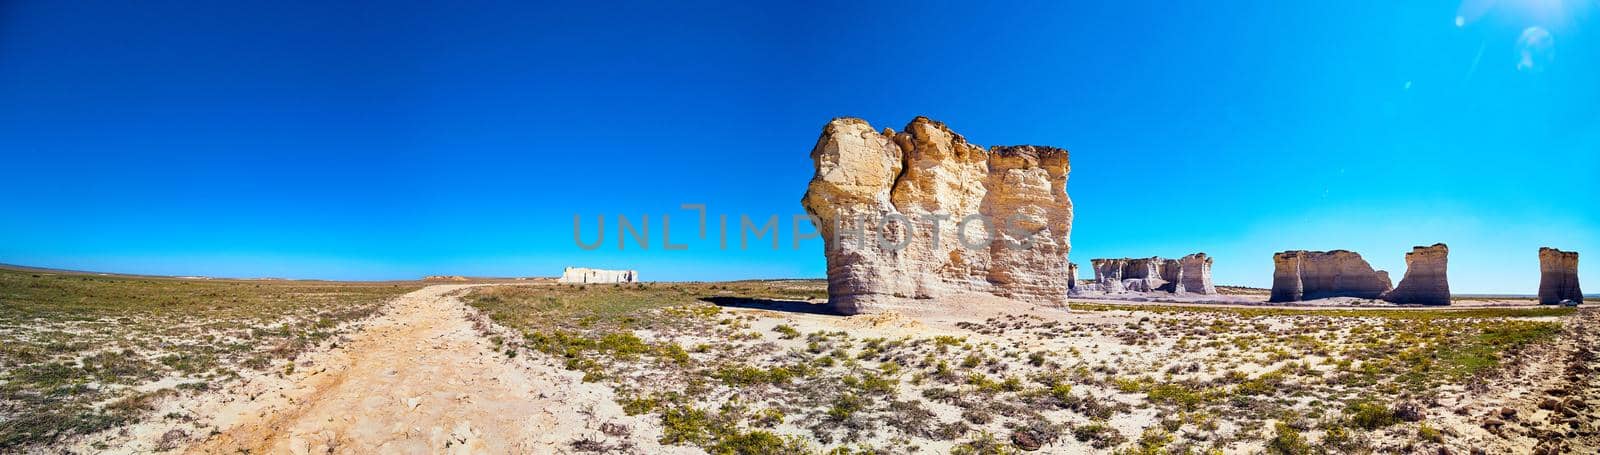 Panorama of dirt road in desert with large vertical rock obelisks by njproductions